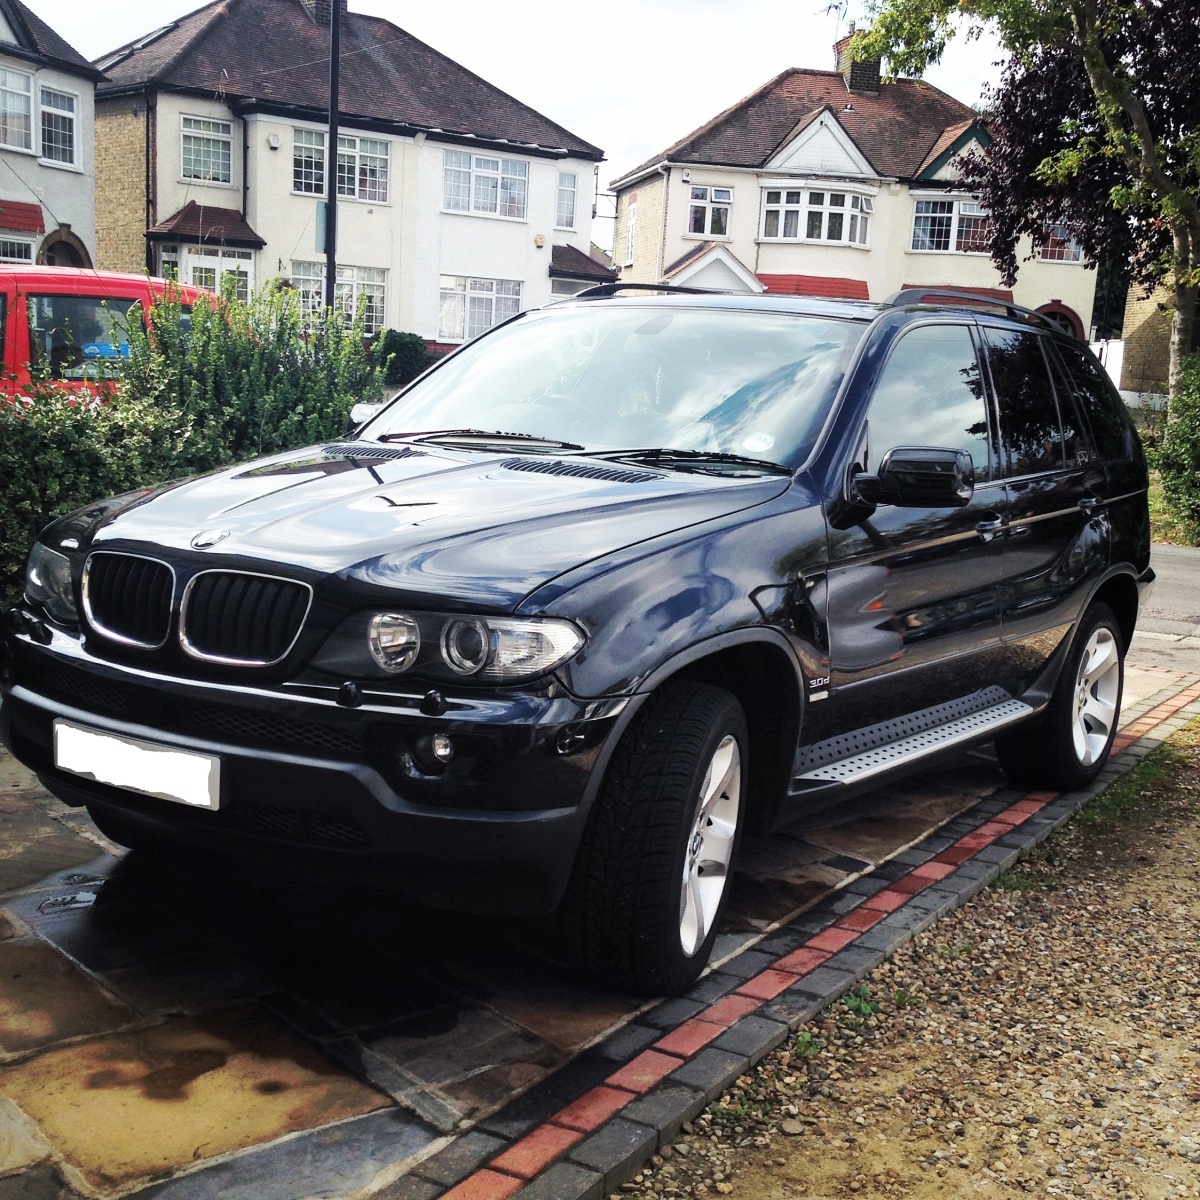 Roundel Reprint: BMW E53 X5 Review (1999) - BimmerLife